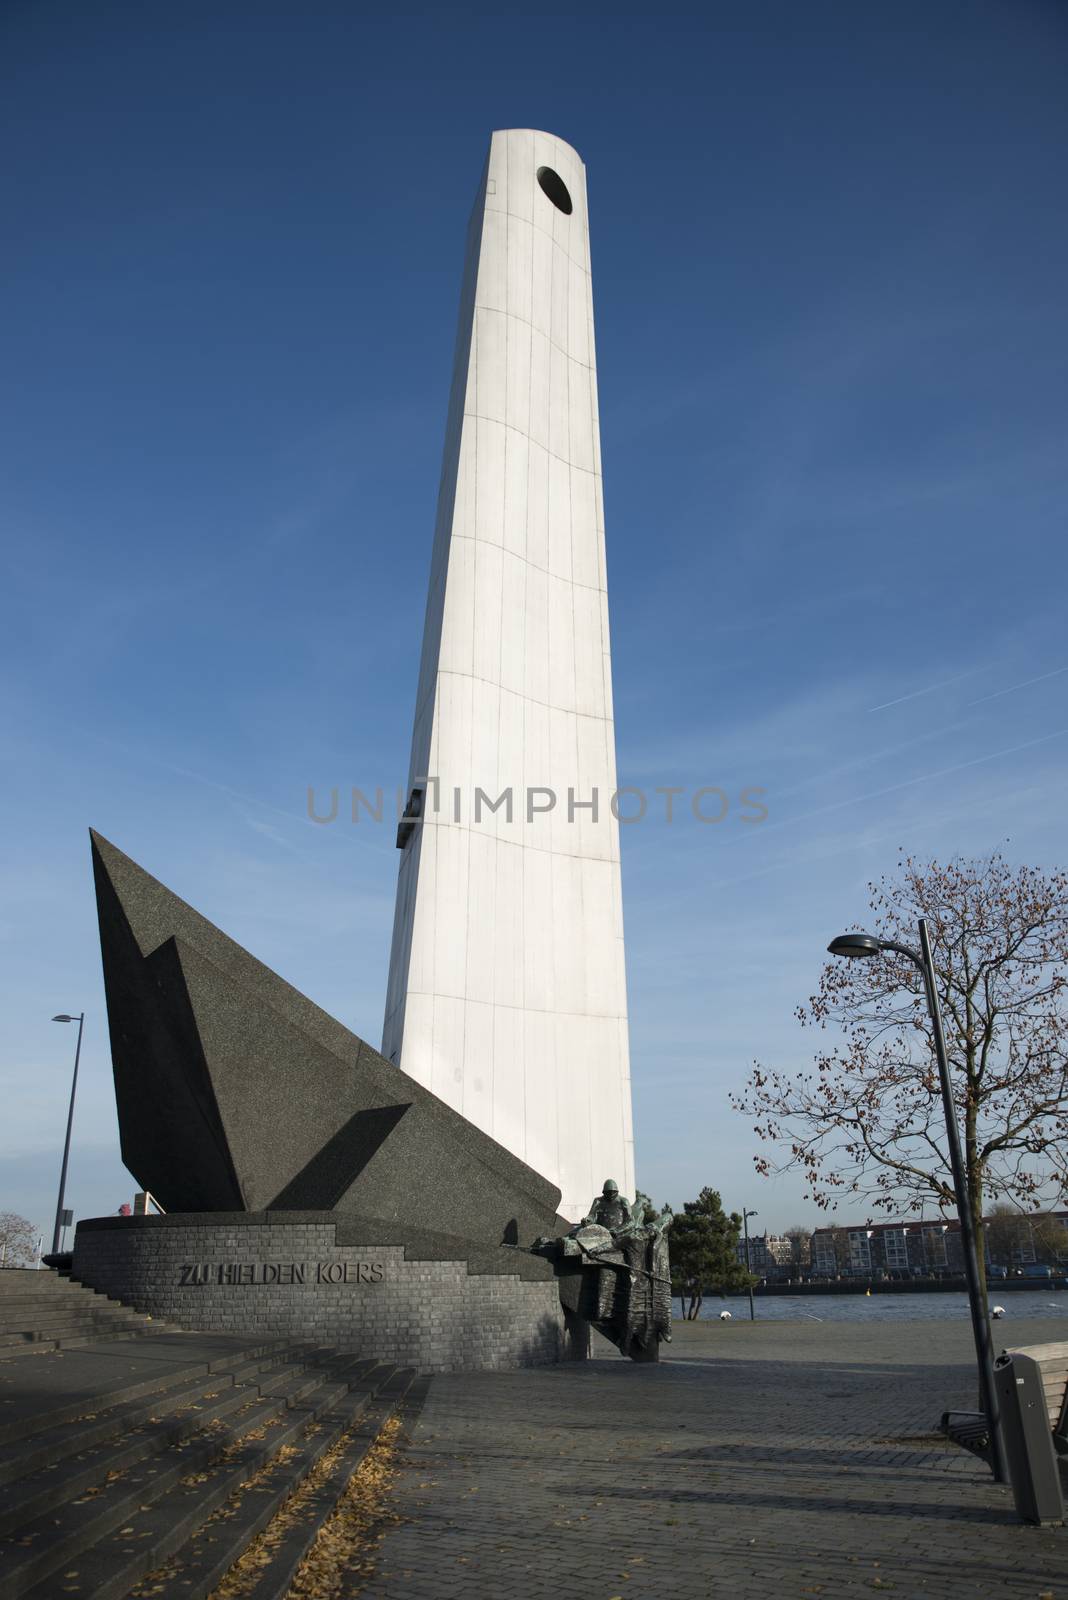 war monument on the promenade of rotterdam near the erasmusbridge, the monument is for the fallen in the second world war